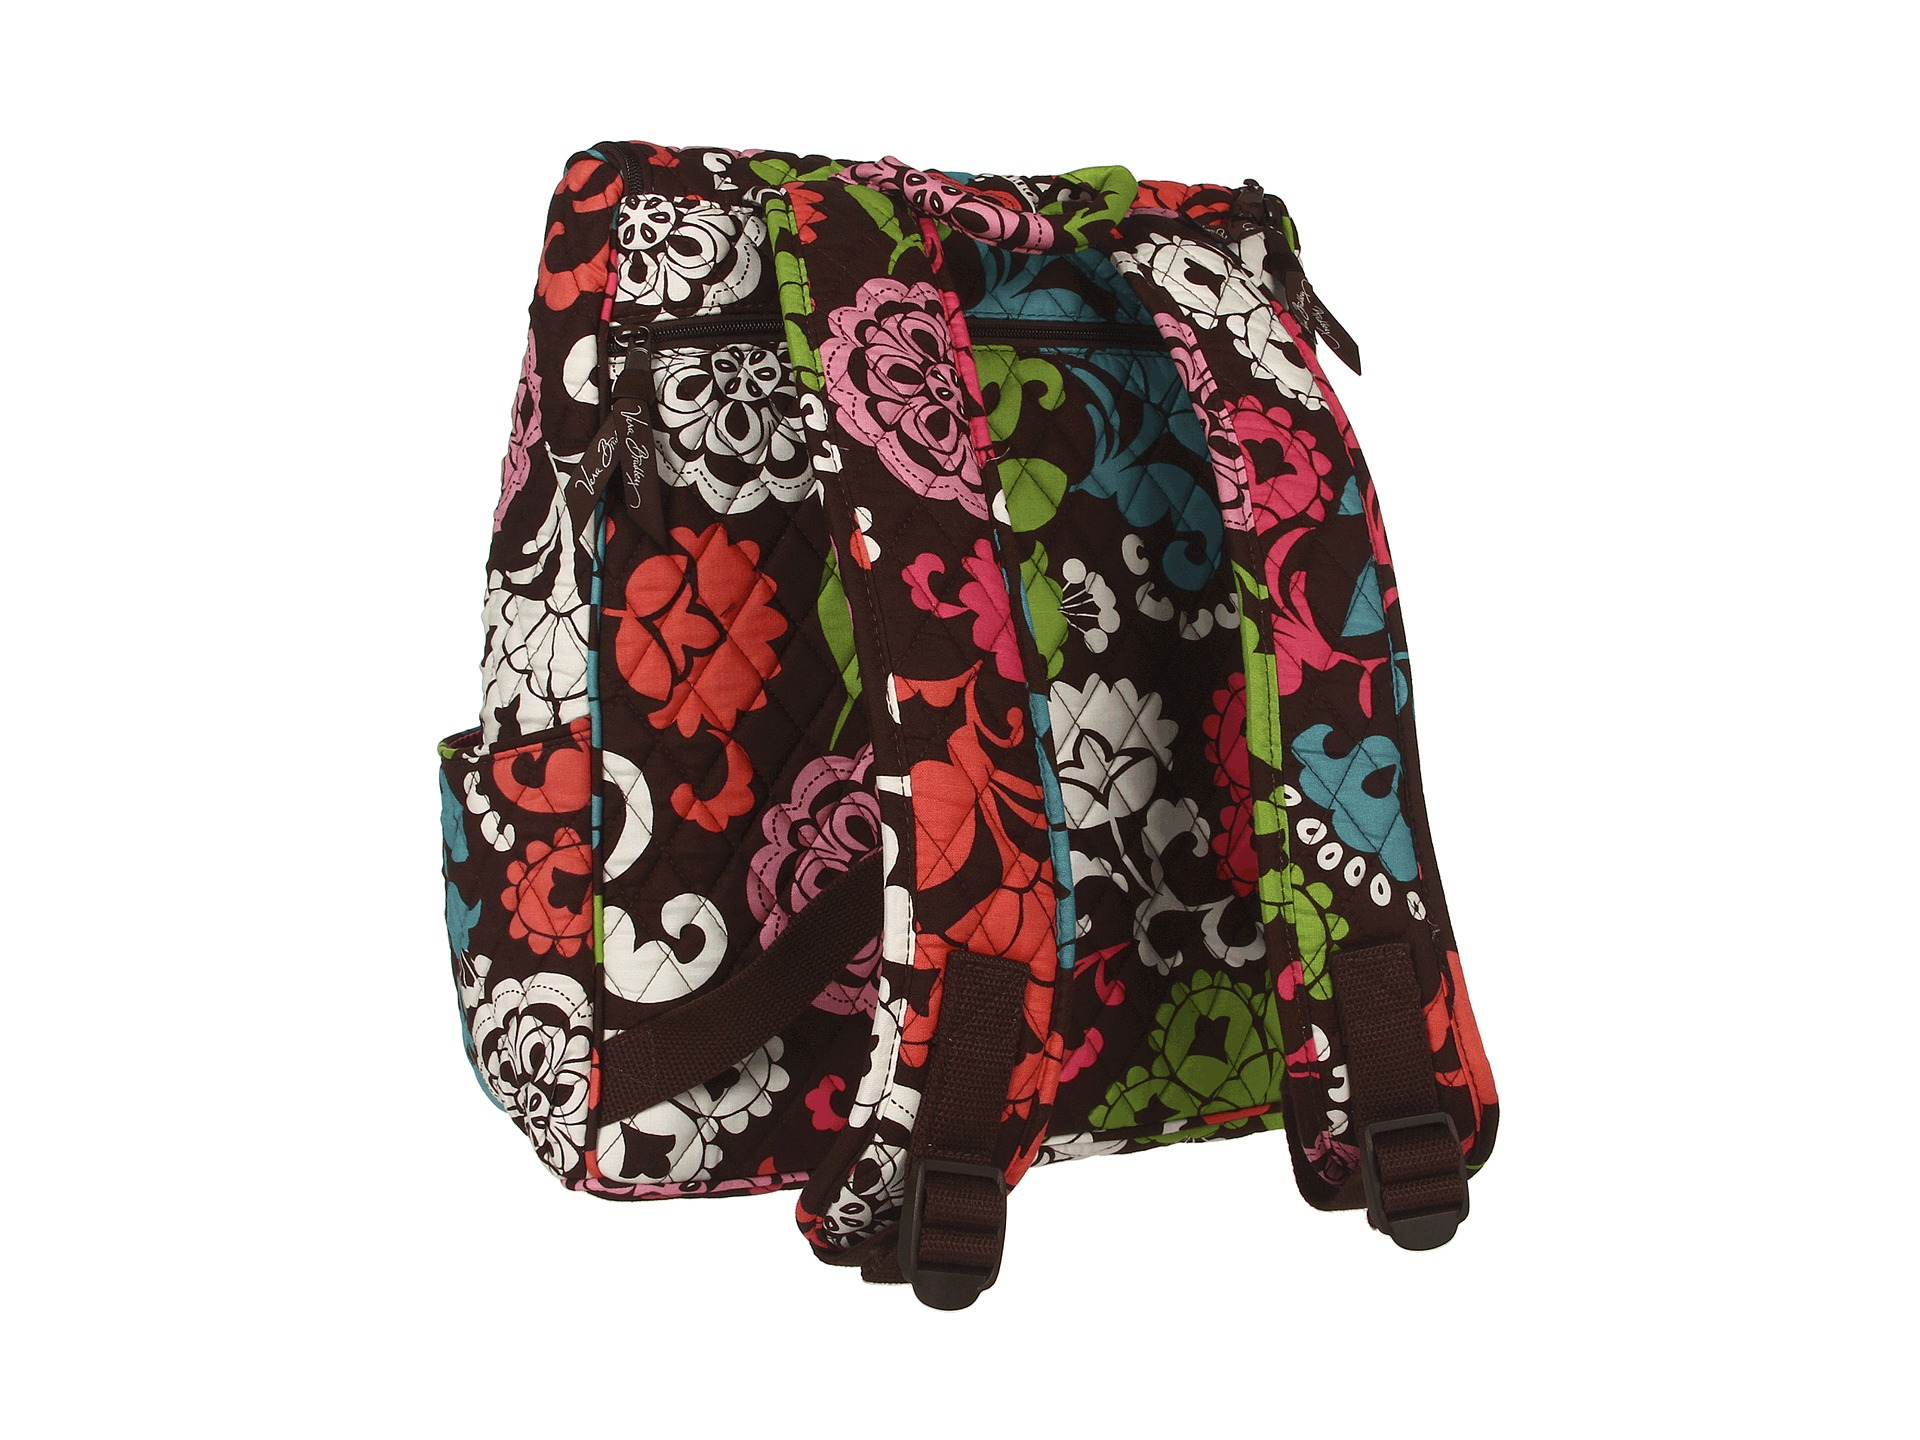 Vera Bradley Double Zip Backpack | Shipped Free at Zappos